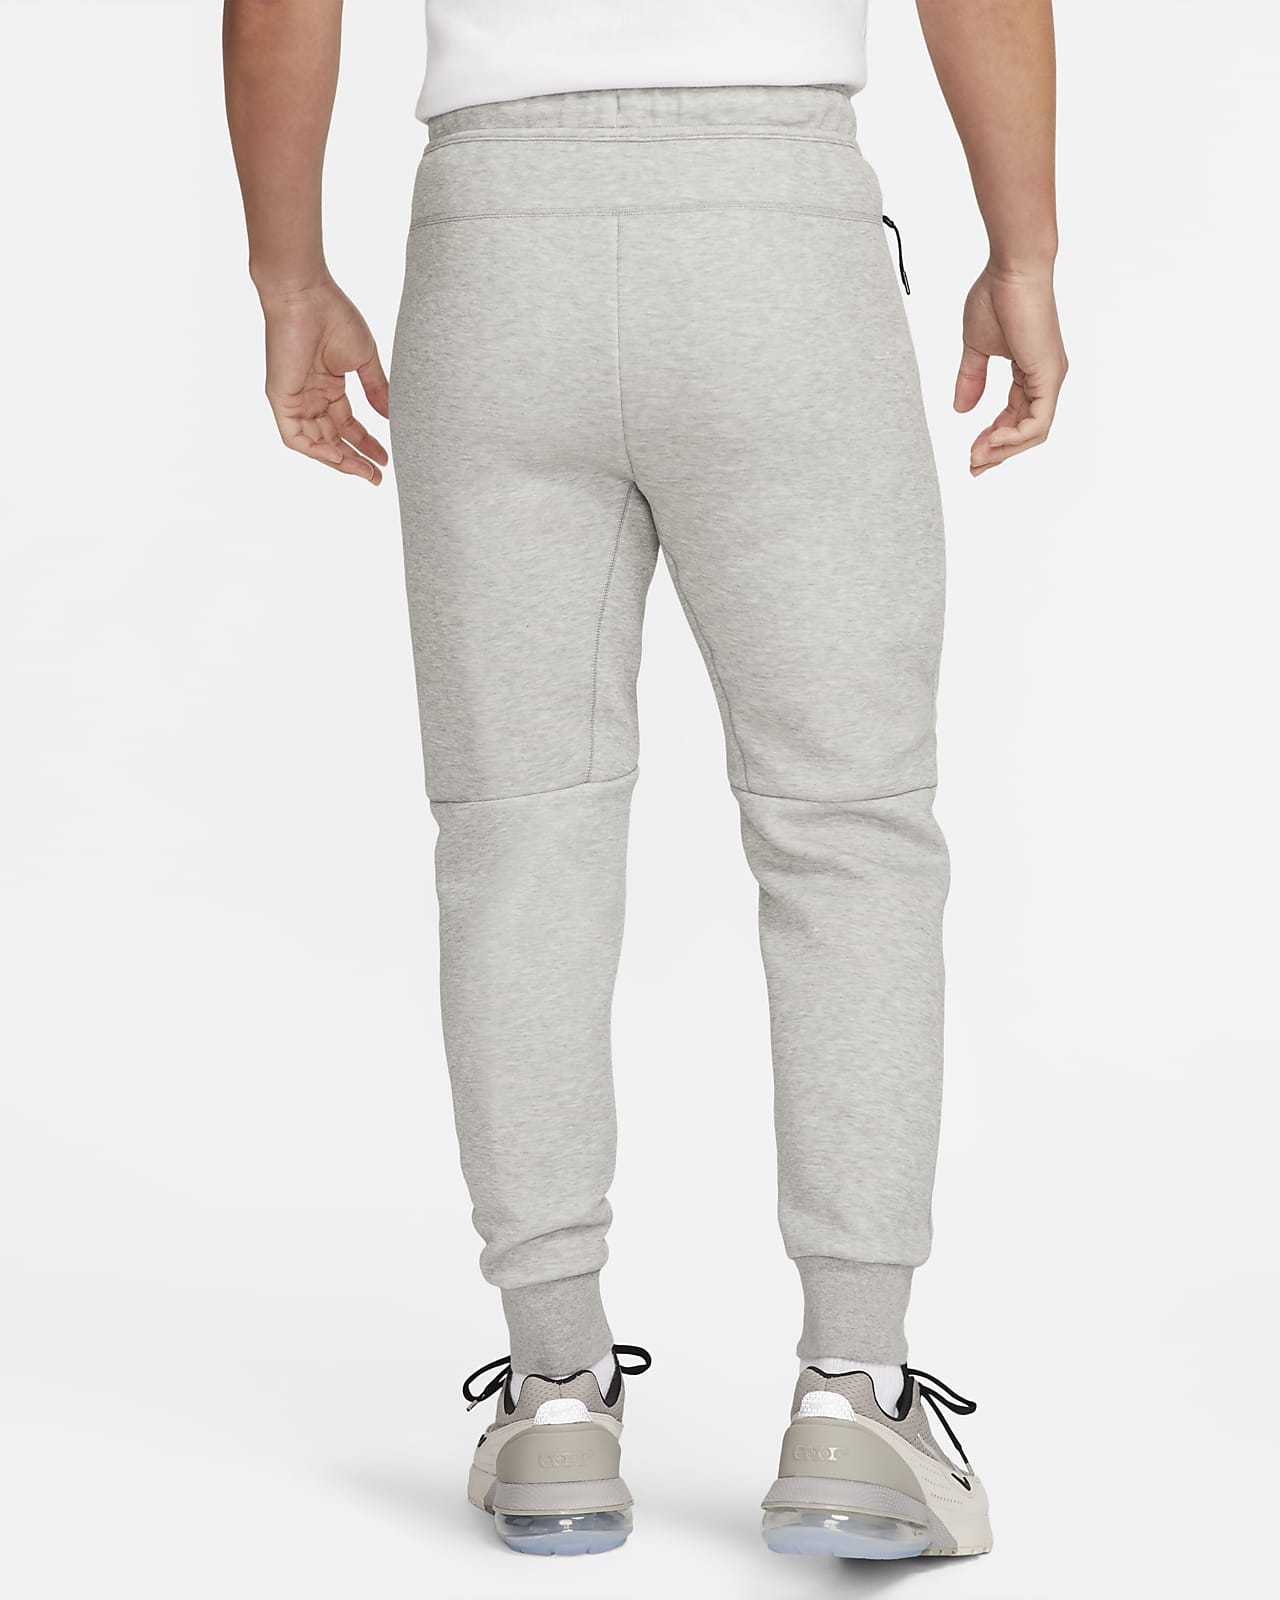 Shop Plaid SlimFit Jogger Pants for Men from latest collection at Forever  21  461037